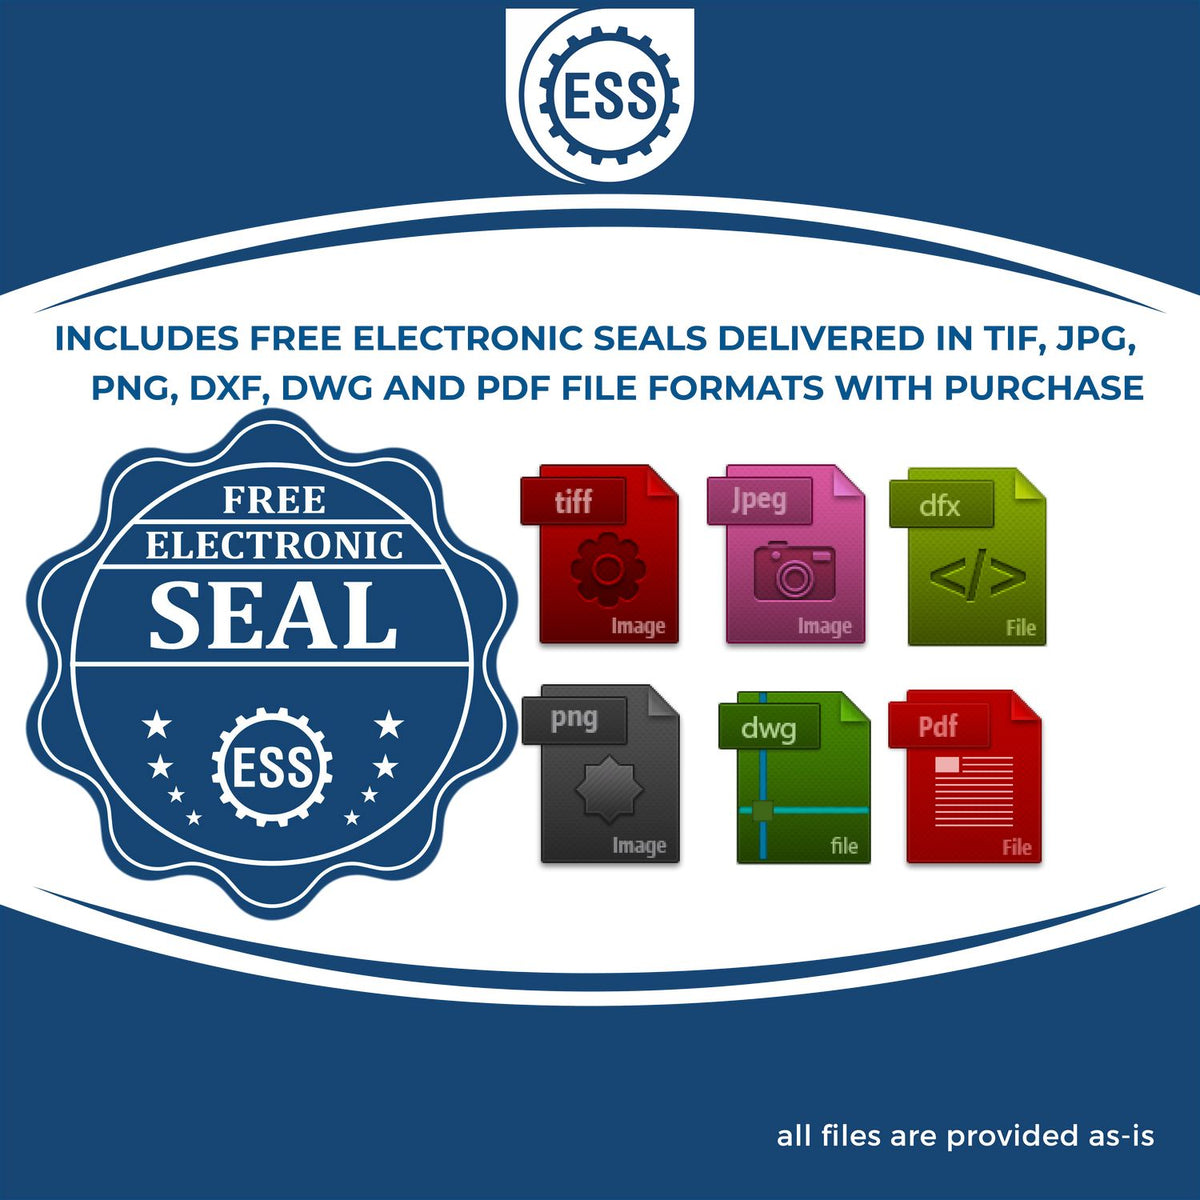 An infographic for the free electronic seal for the Hybrid Kentucky Architect Seal illustrating the different file type icons such as DXF, DWG, TIF, JPG and PNG.